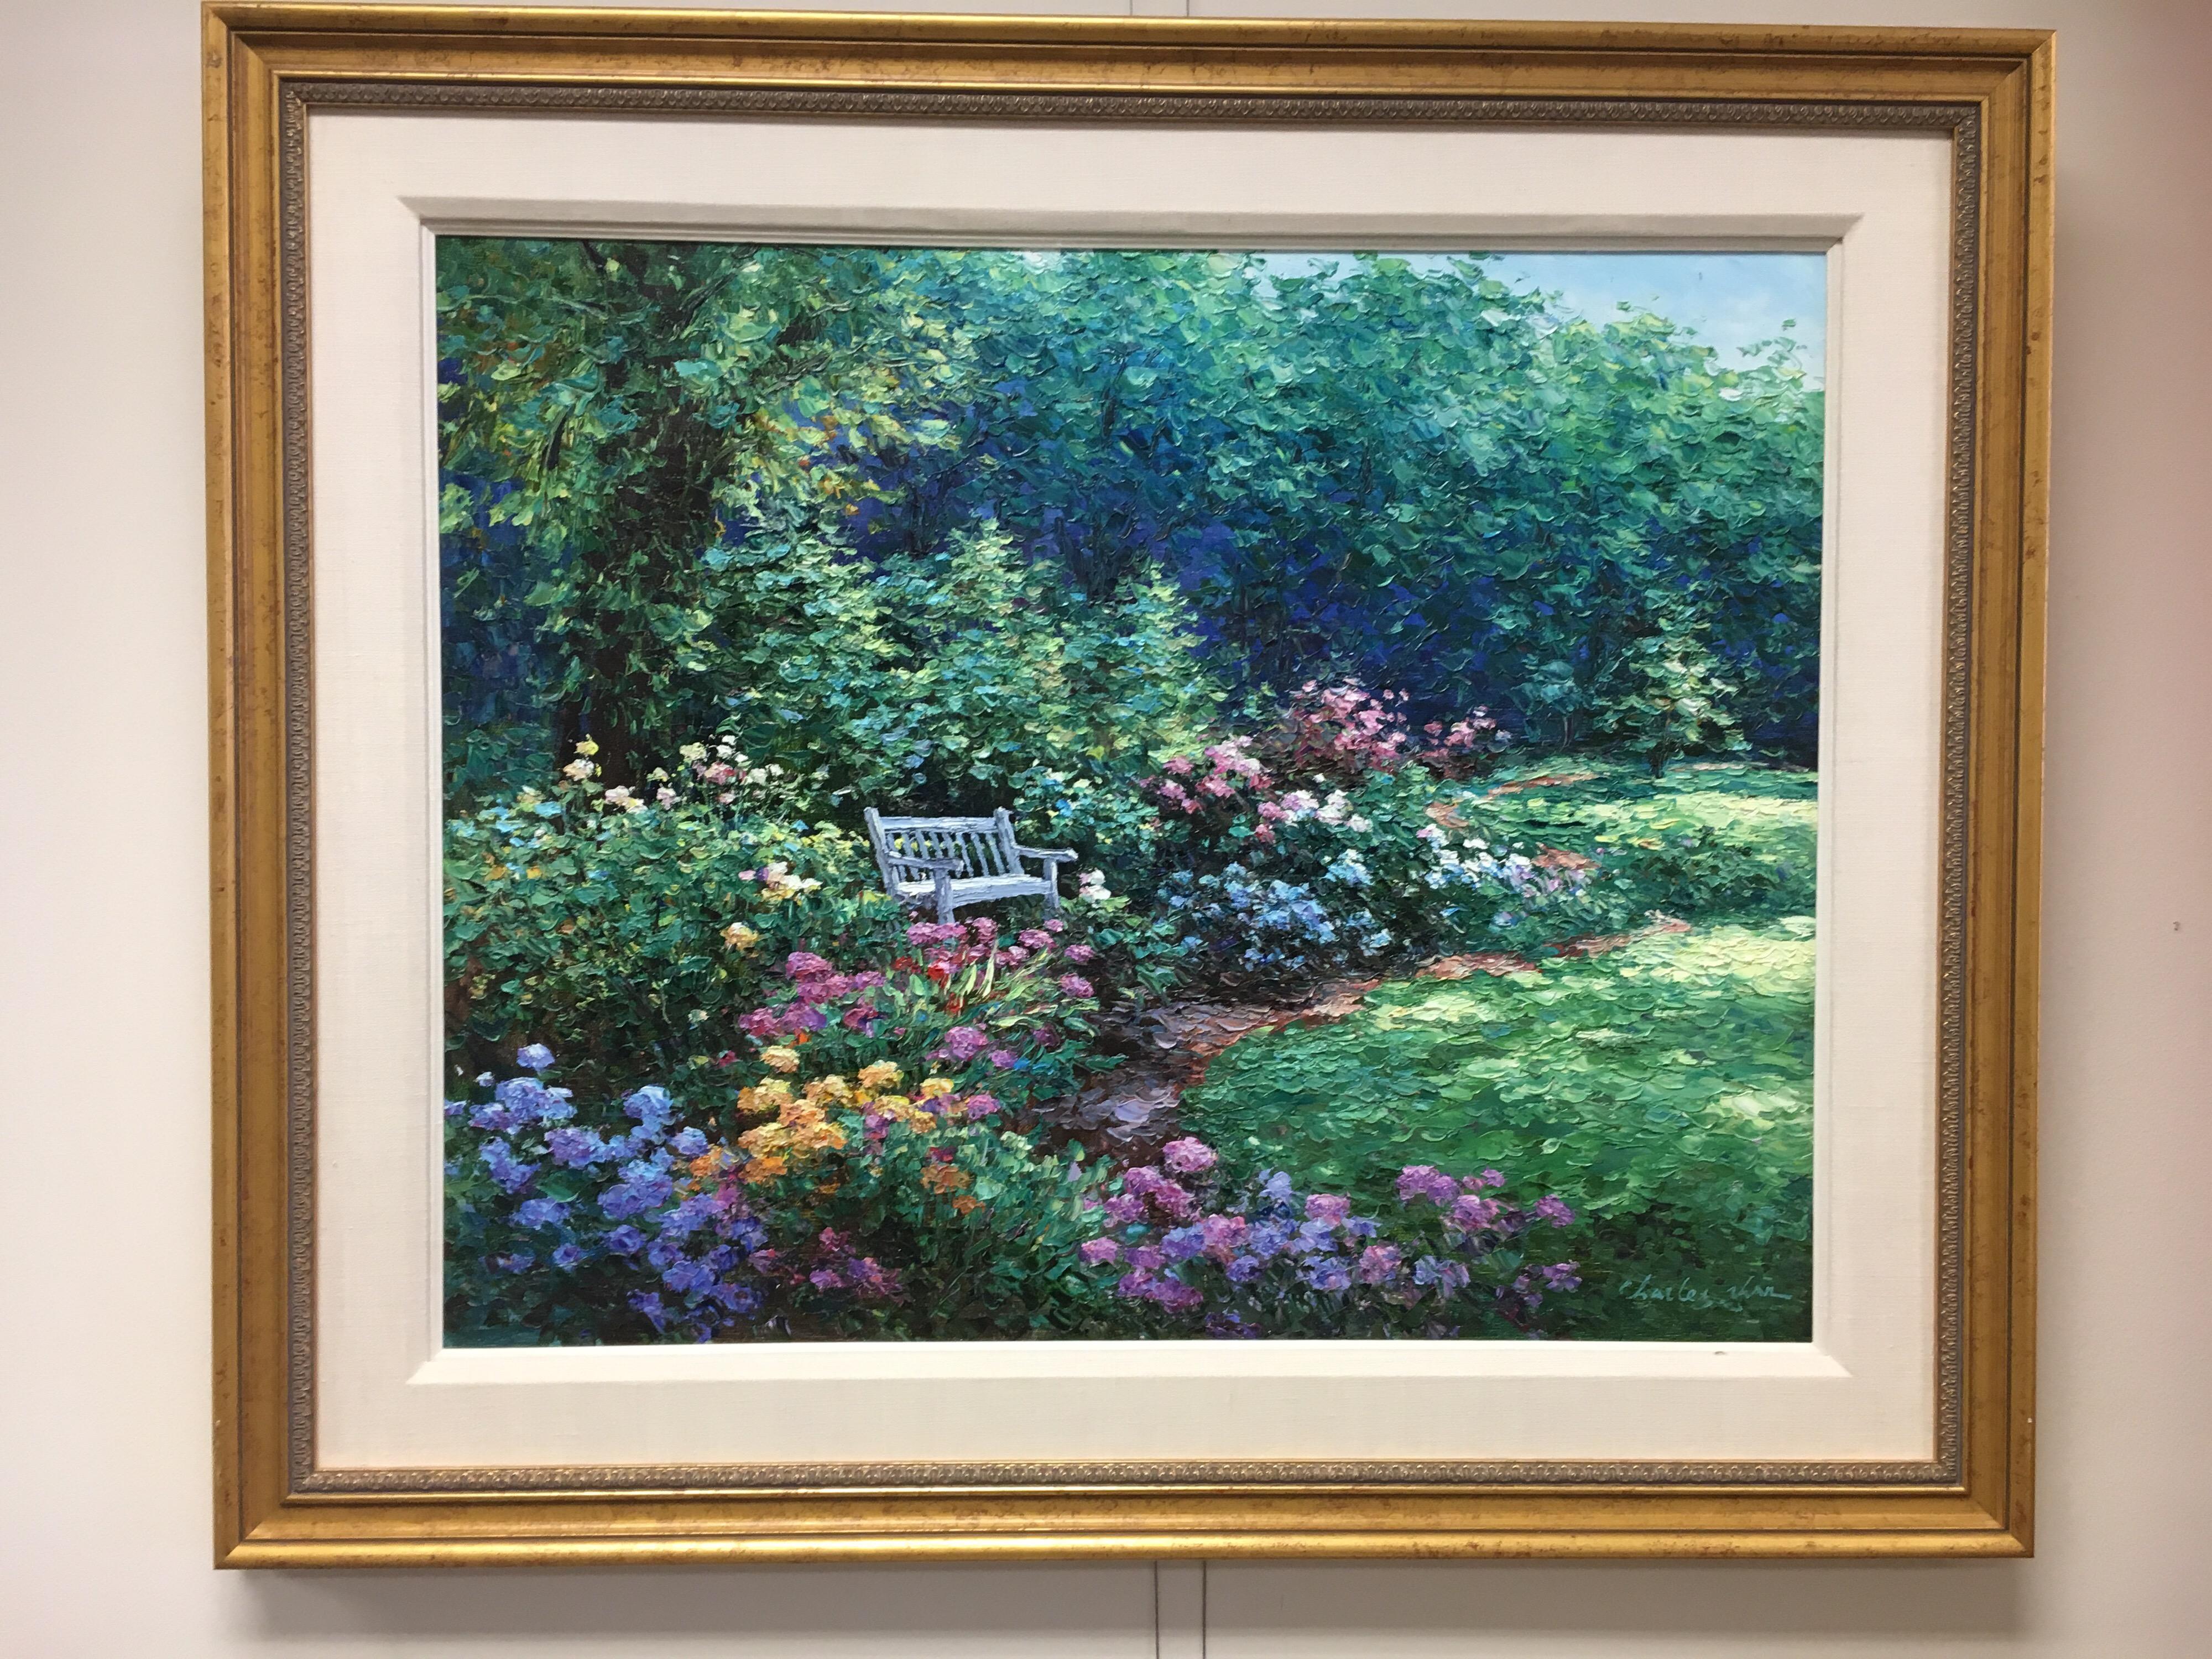 Original signed oil on canvas framed in elegant gilt wood frame by the artist Charles Zhan.
The painting is titled 